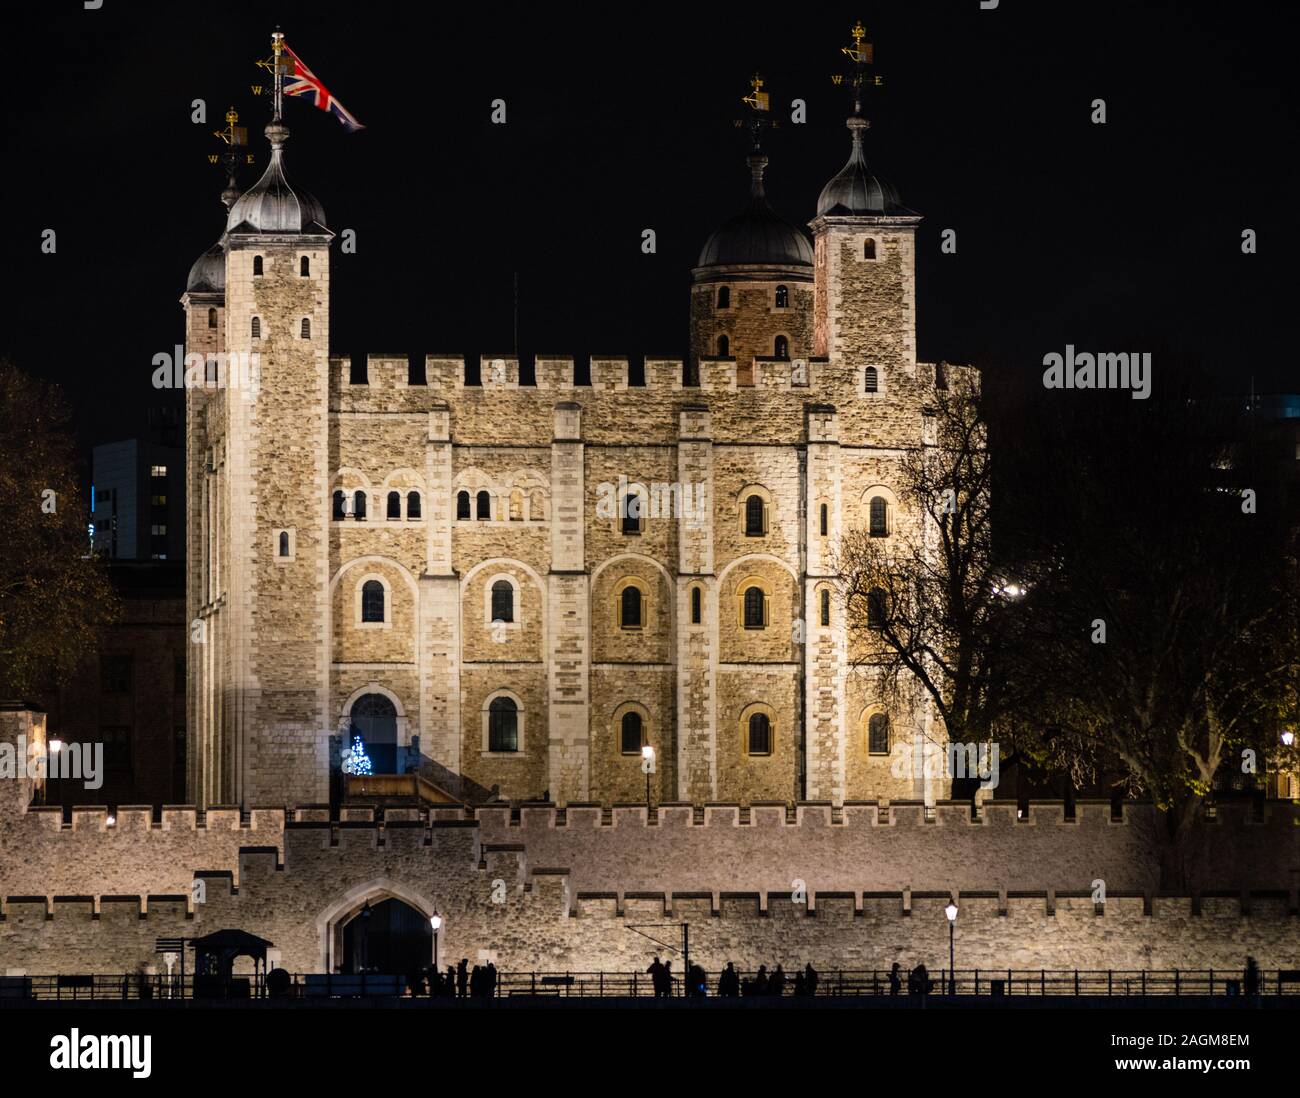 Tourists Outside The White Tower, Night Time, Tower of London, River Thames, City of London, England, UK, GB. Stock Photo